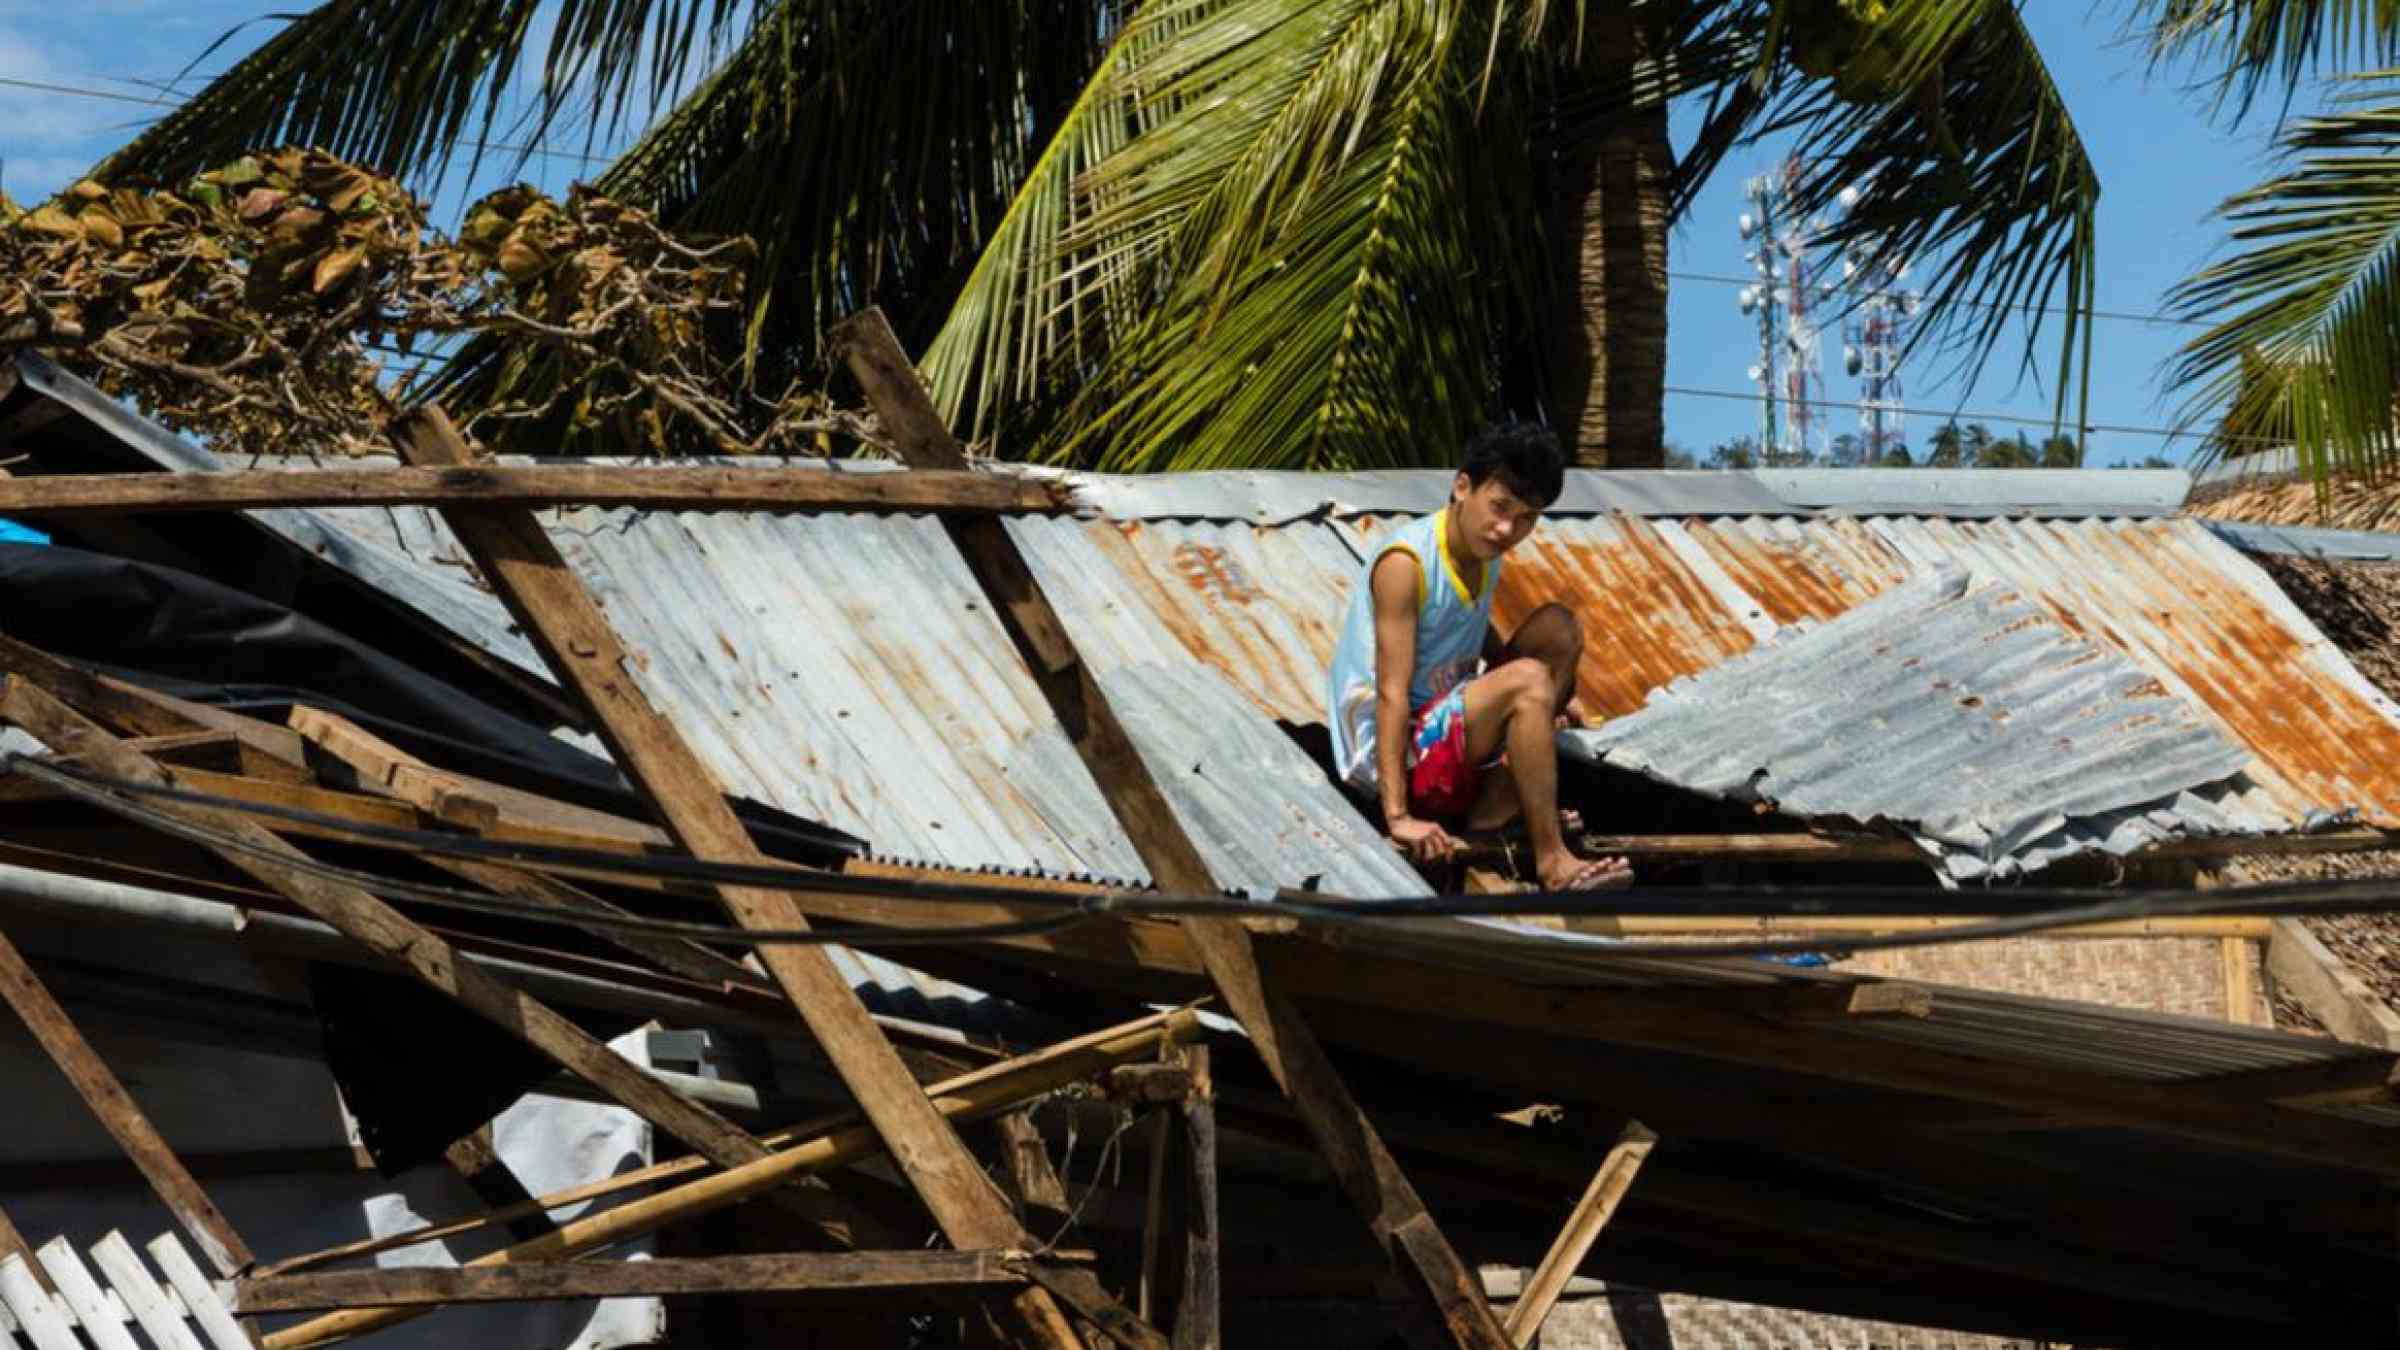 A Filippino man repairs a roof destroyed by Typhoon Haiyan, 2013. Richard Whitcombe/Shutterstock